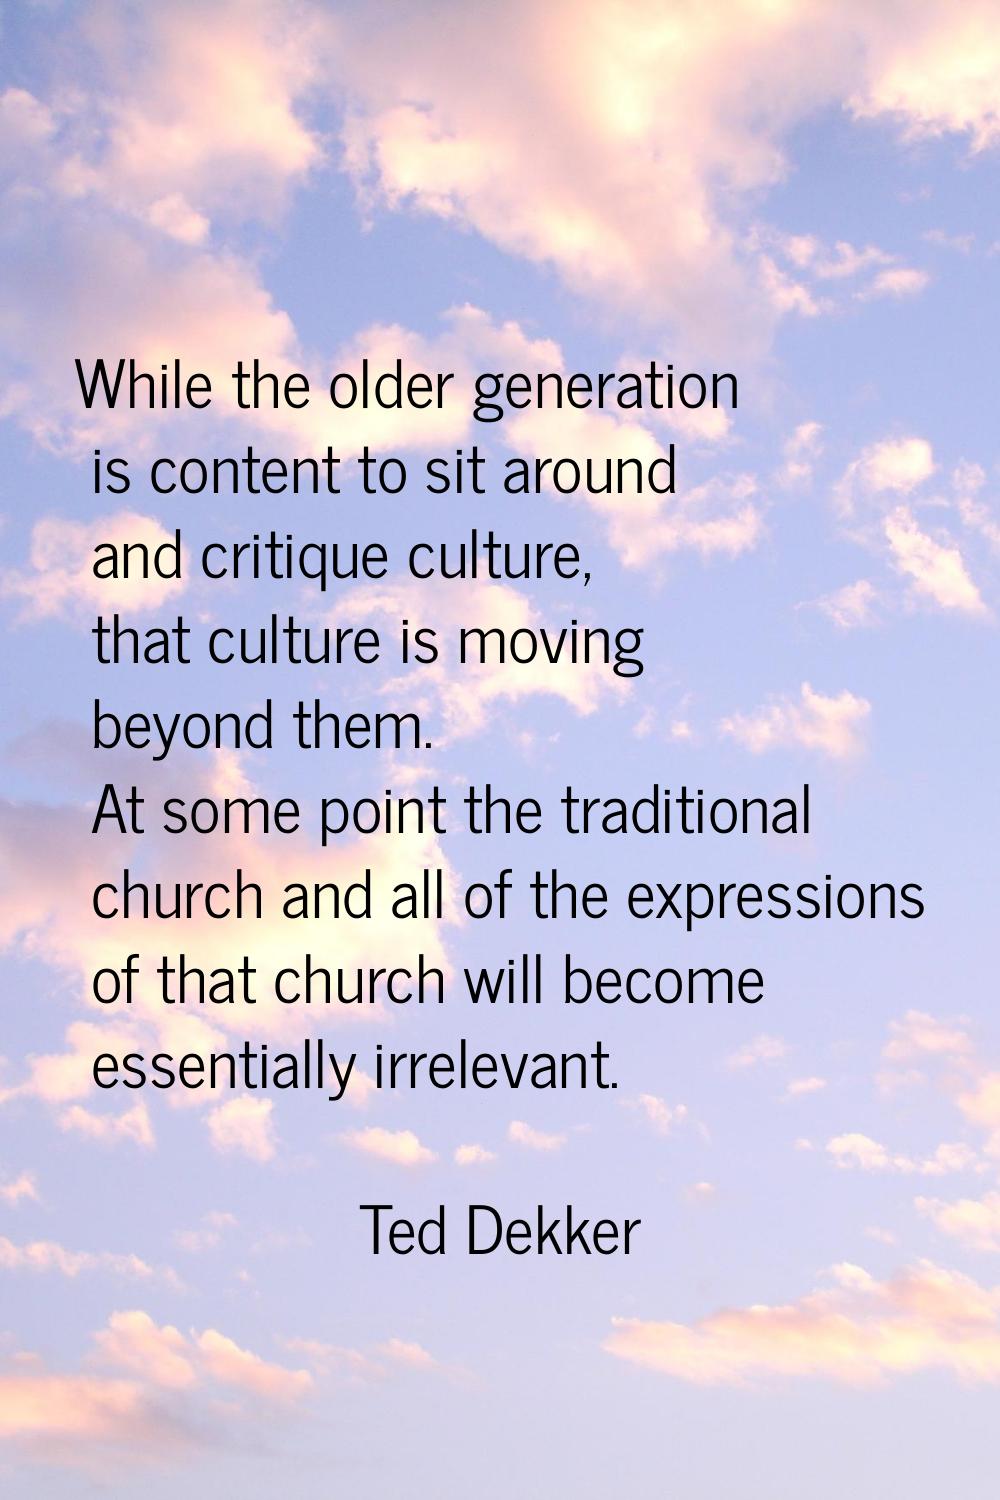 While the older generation is content to sit around and critique culture, that culture is moving be